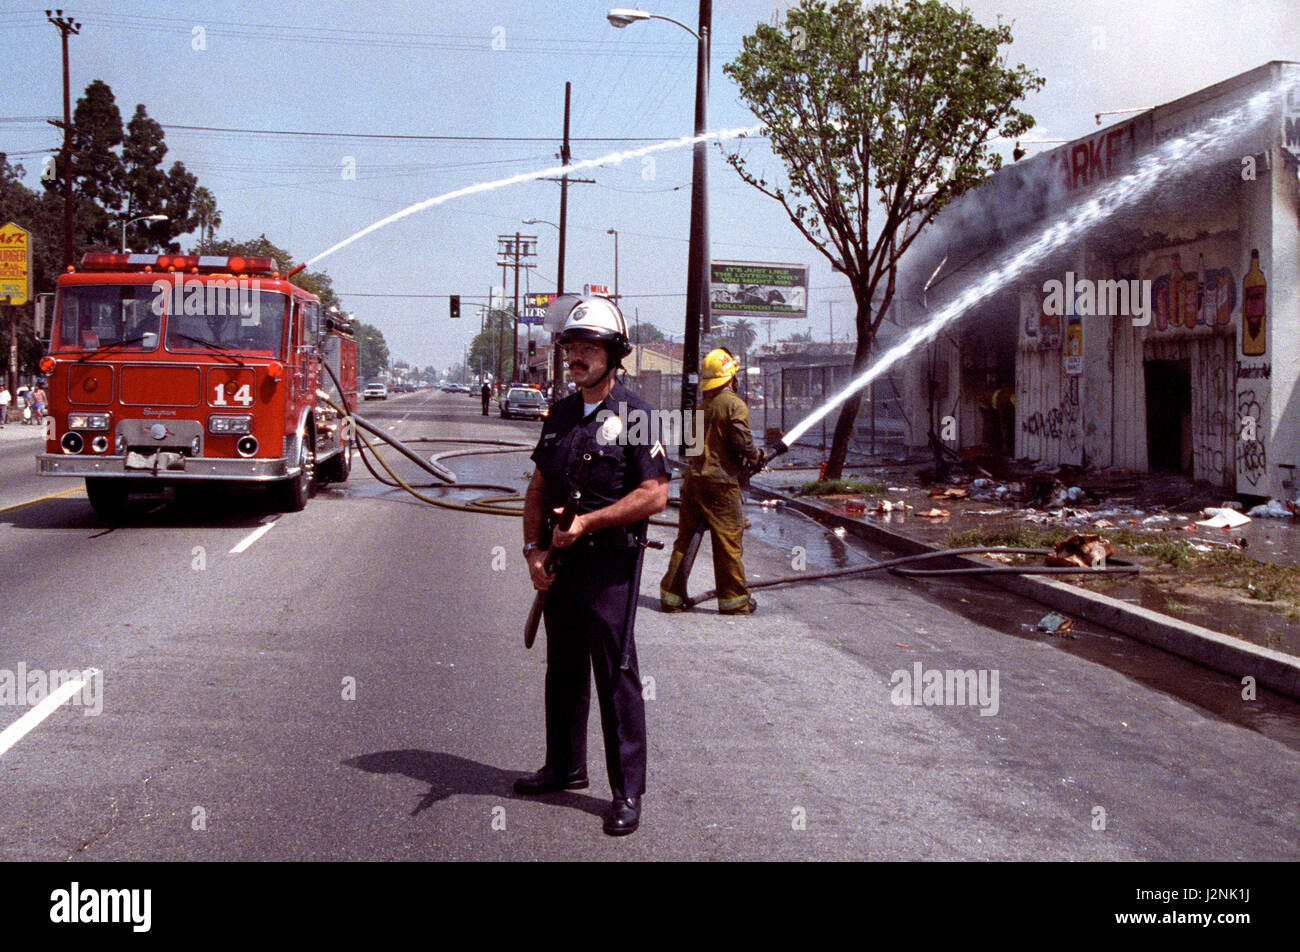 April 29/May 4 1992. Los Angeles CA. Coverage from the Los Angeles riots after the not guilty acquittal of policemen on trial in beating of Rodney King. In total, 55 people were killed during the riots, more than 2,000 people were injured, and more than 11,000 were arrested and $1 billion in property damage. Photos by Gene Blevins/LA DailyNews/ZumaPress. Credit: Gene Blevins/ZUMA Wire/Alamy Live News Stock Photo